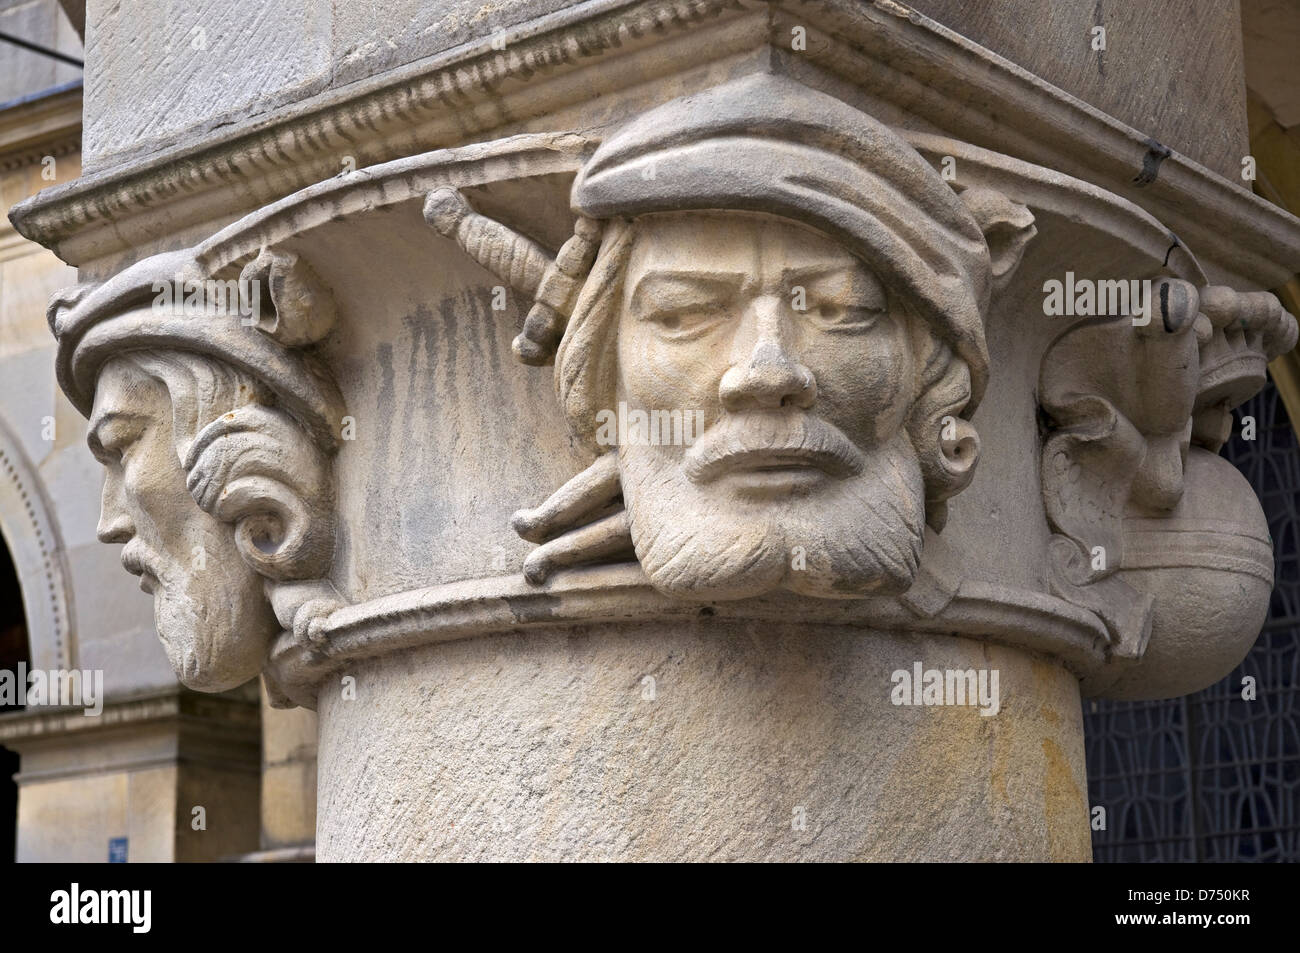 Figures on column of the Old Town Hall in Muenster, NRW, Germany. Stock Photo